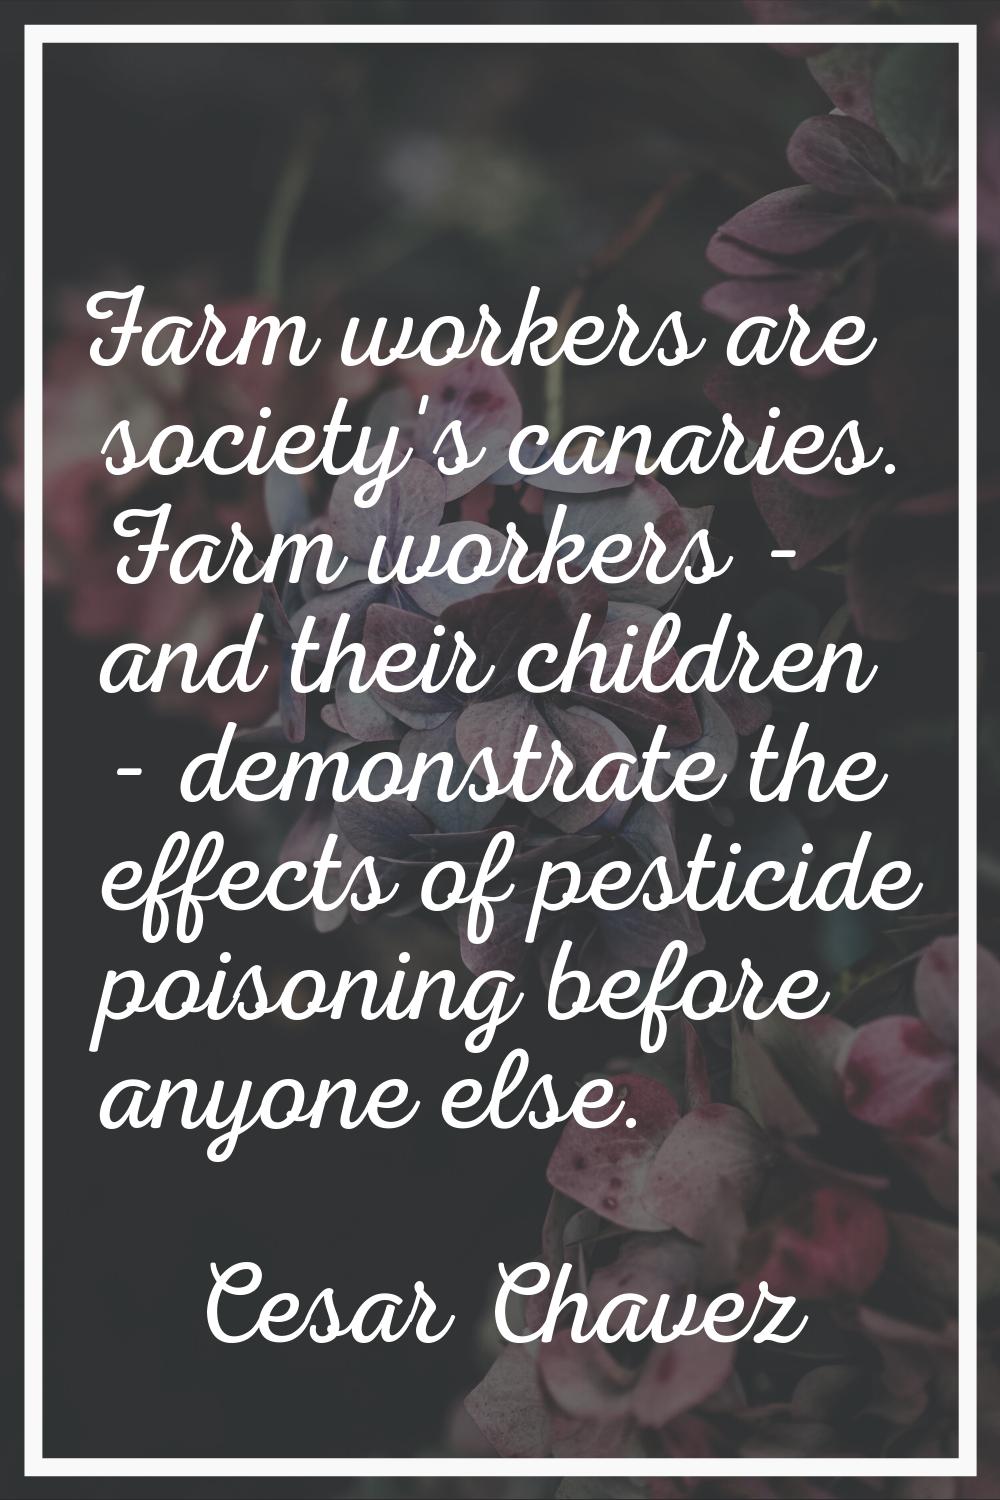 Farm workers are society's canaries. Farm workers - and their children - demonstrate the effects of